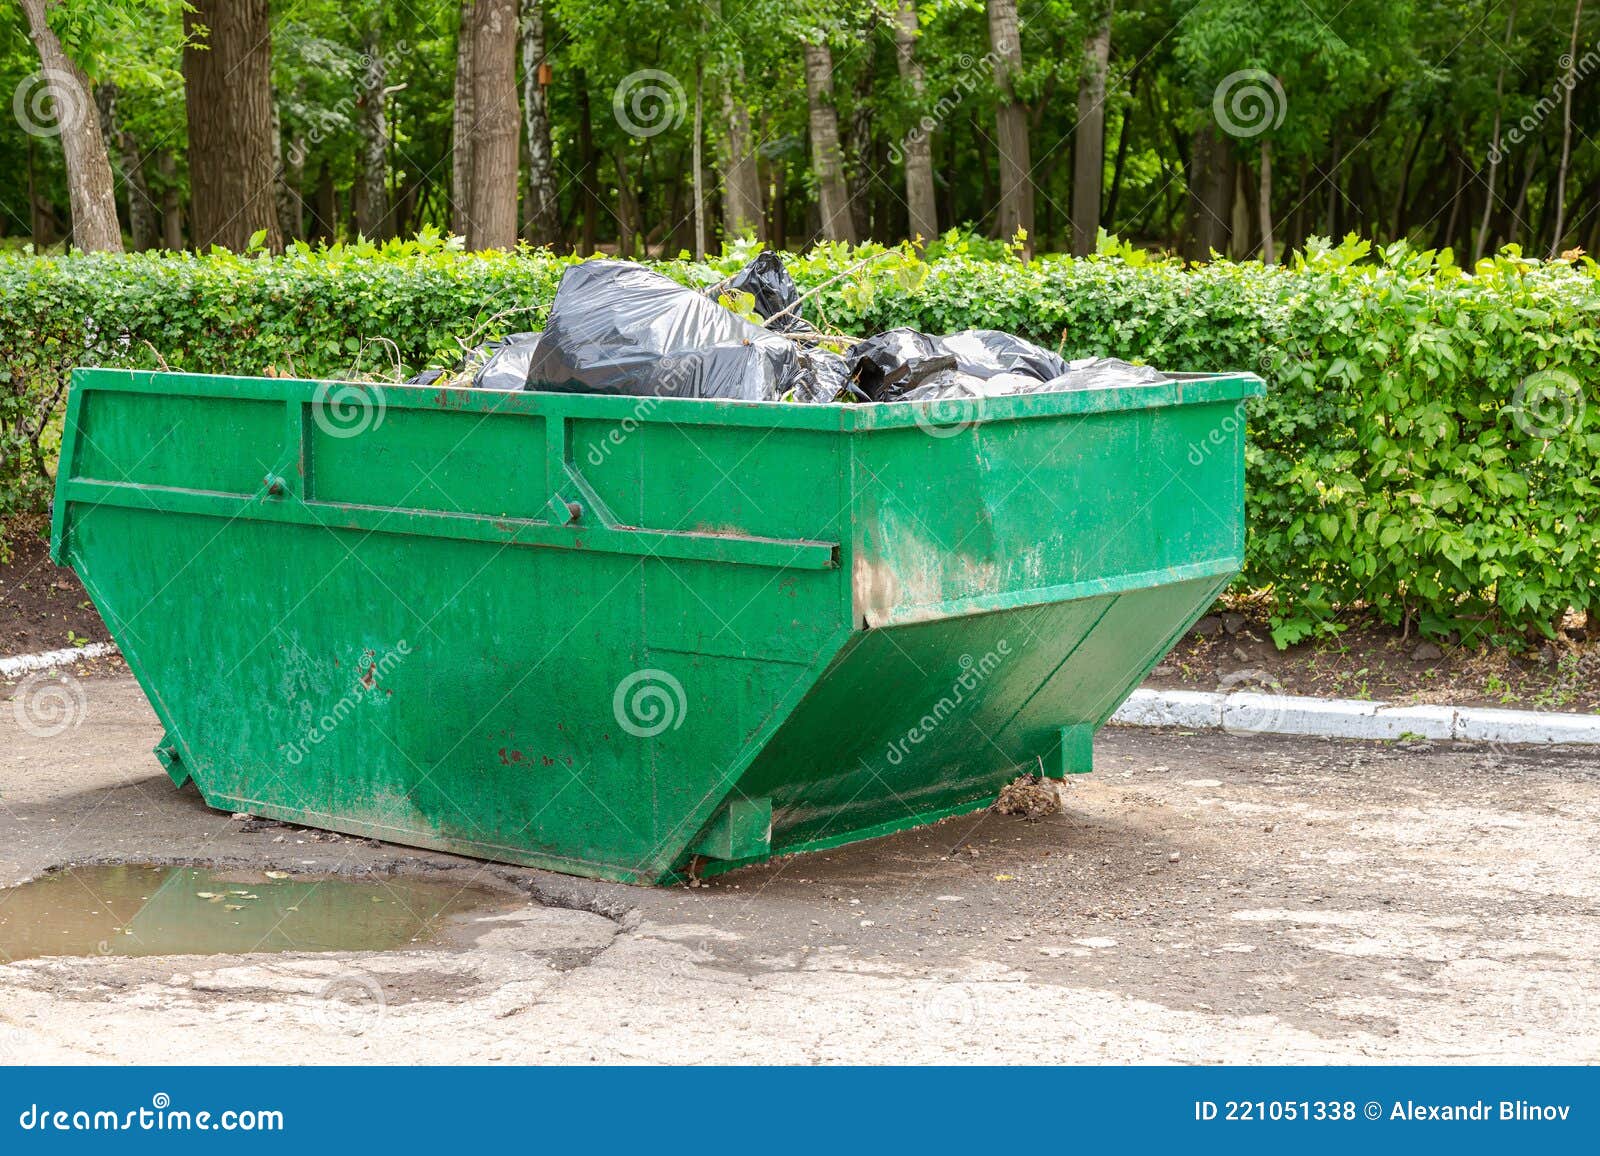 Big Metal Garbage Container for Waste Stock Photo - Image of